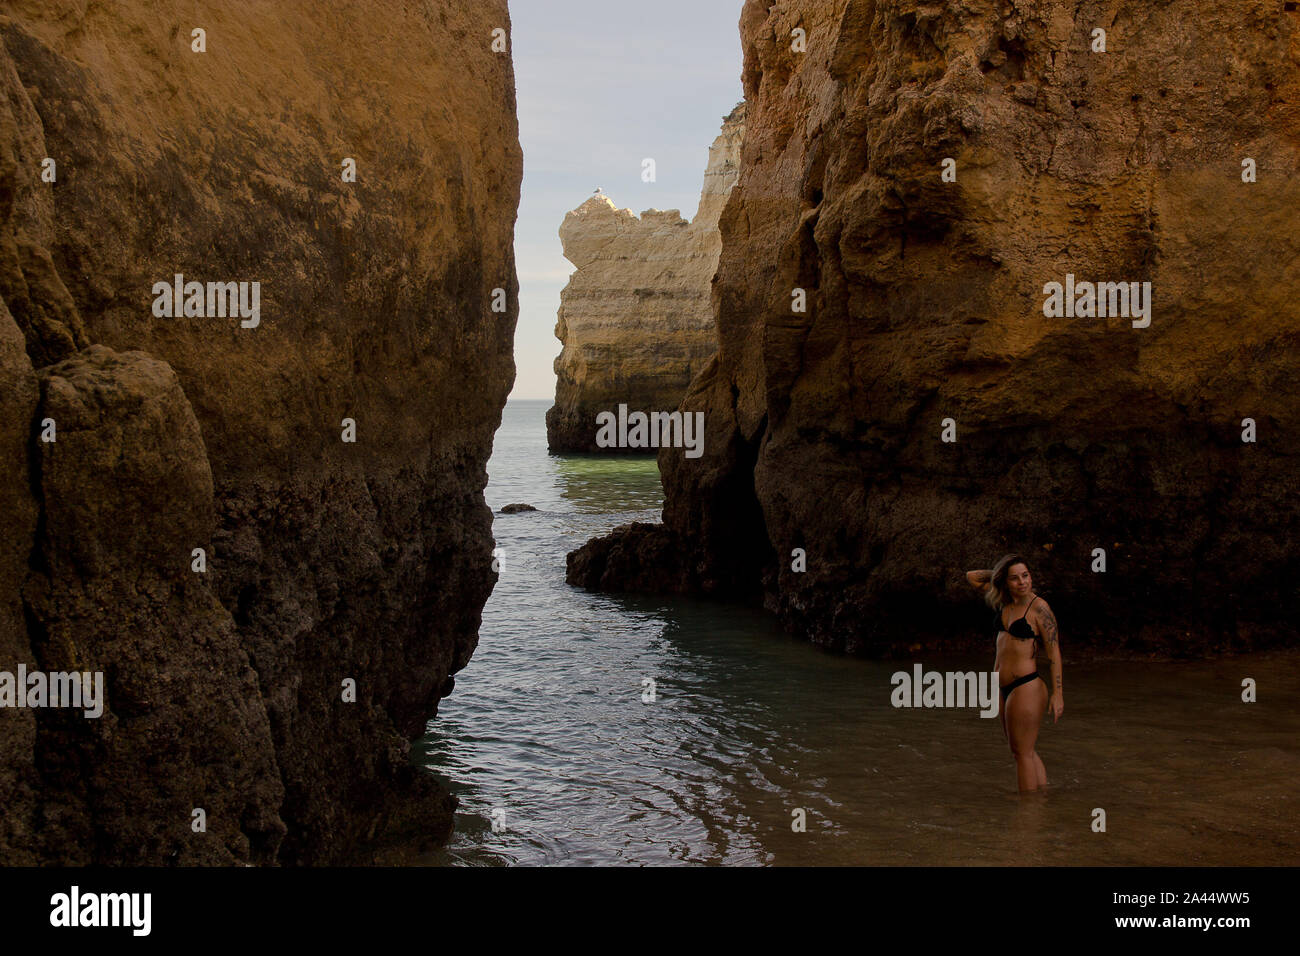 The Lagos arch (Portugal) - with pretty girl as added bonus Stock Photo